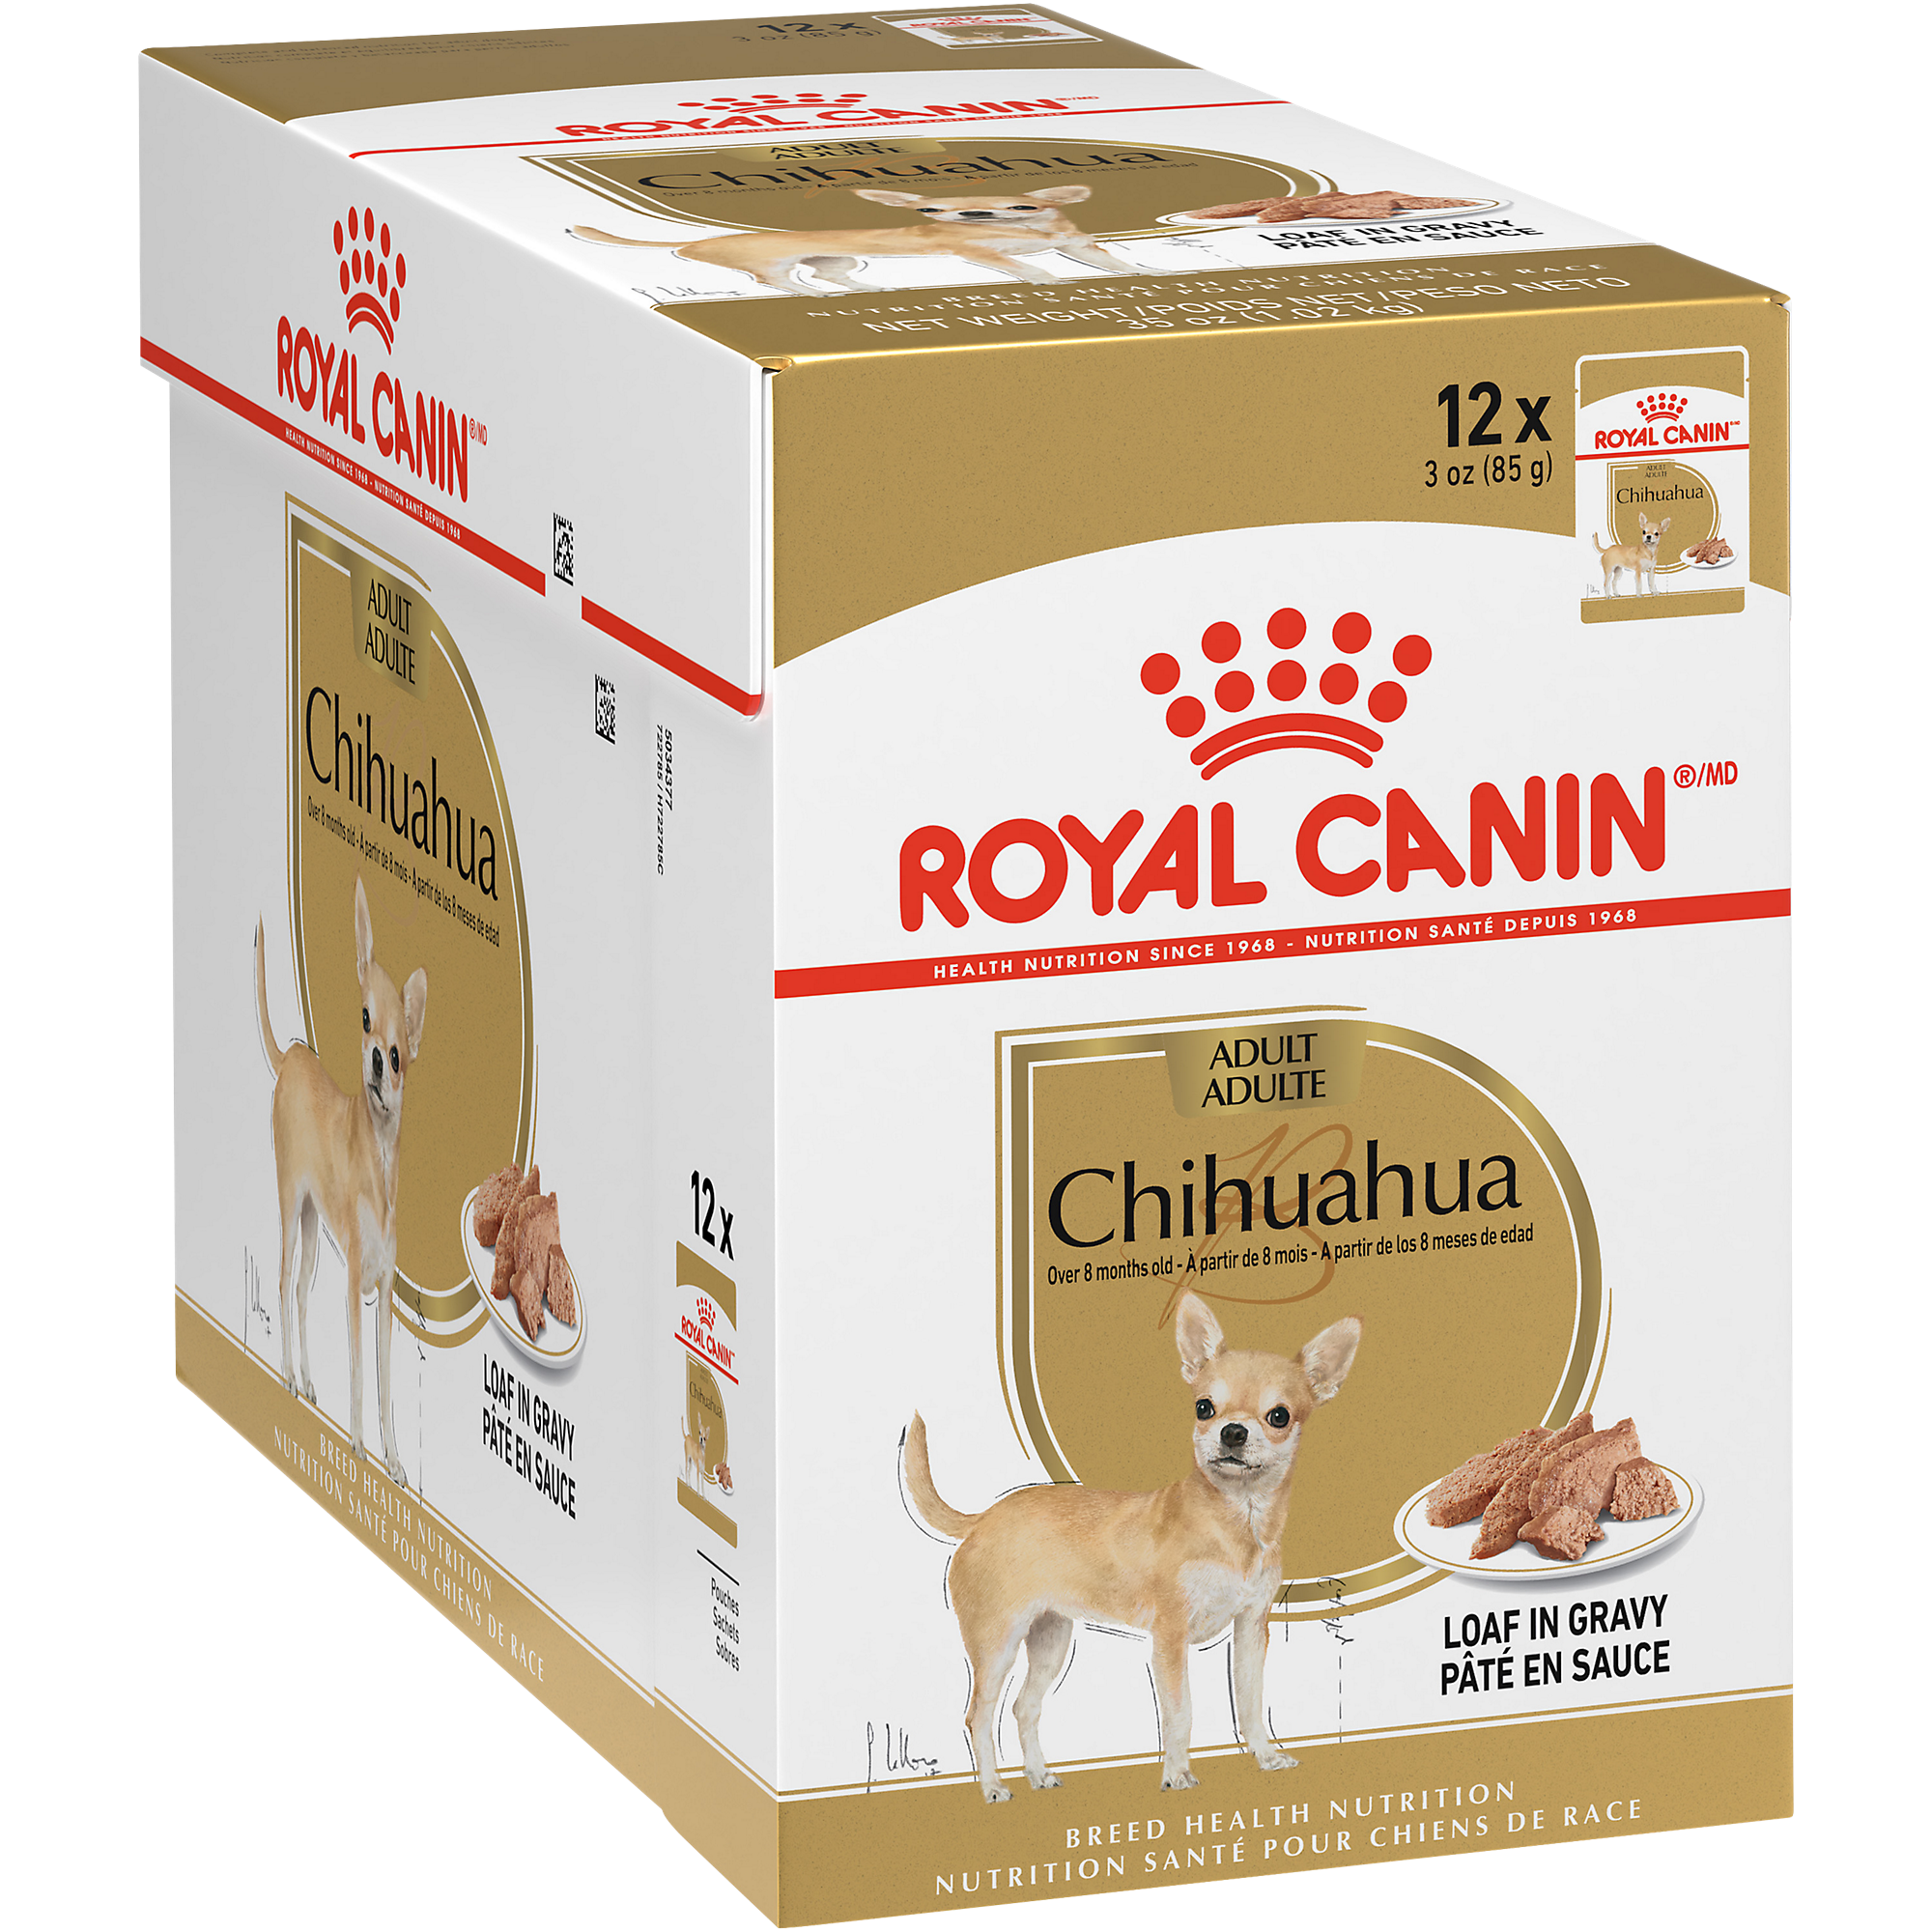 Royal Canin® Breed Health Nutrition® Chihuahua Loaf In Gravy Pouch Dog Food, 3 oz, 12-pack